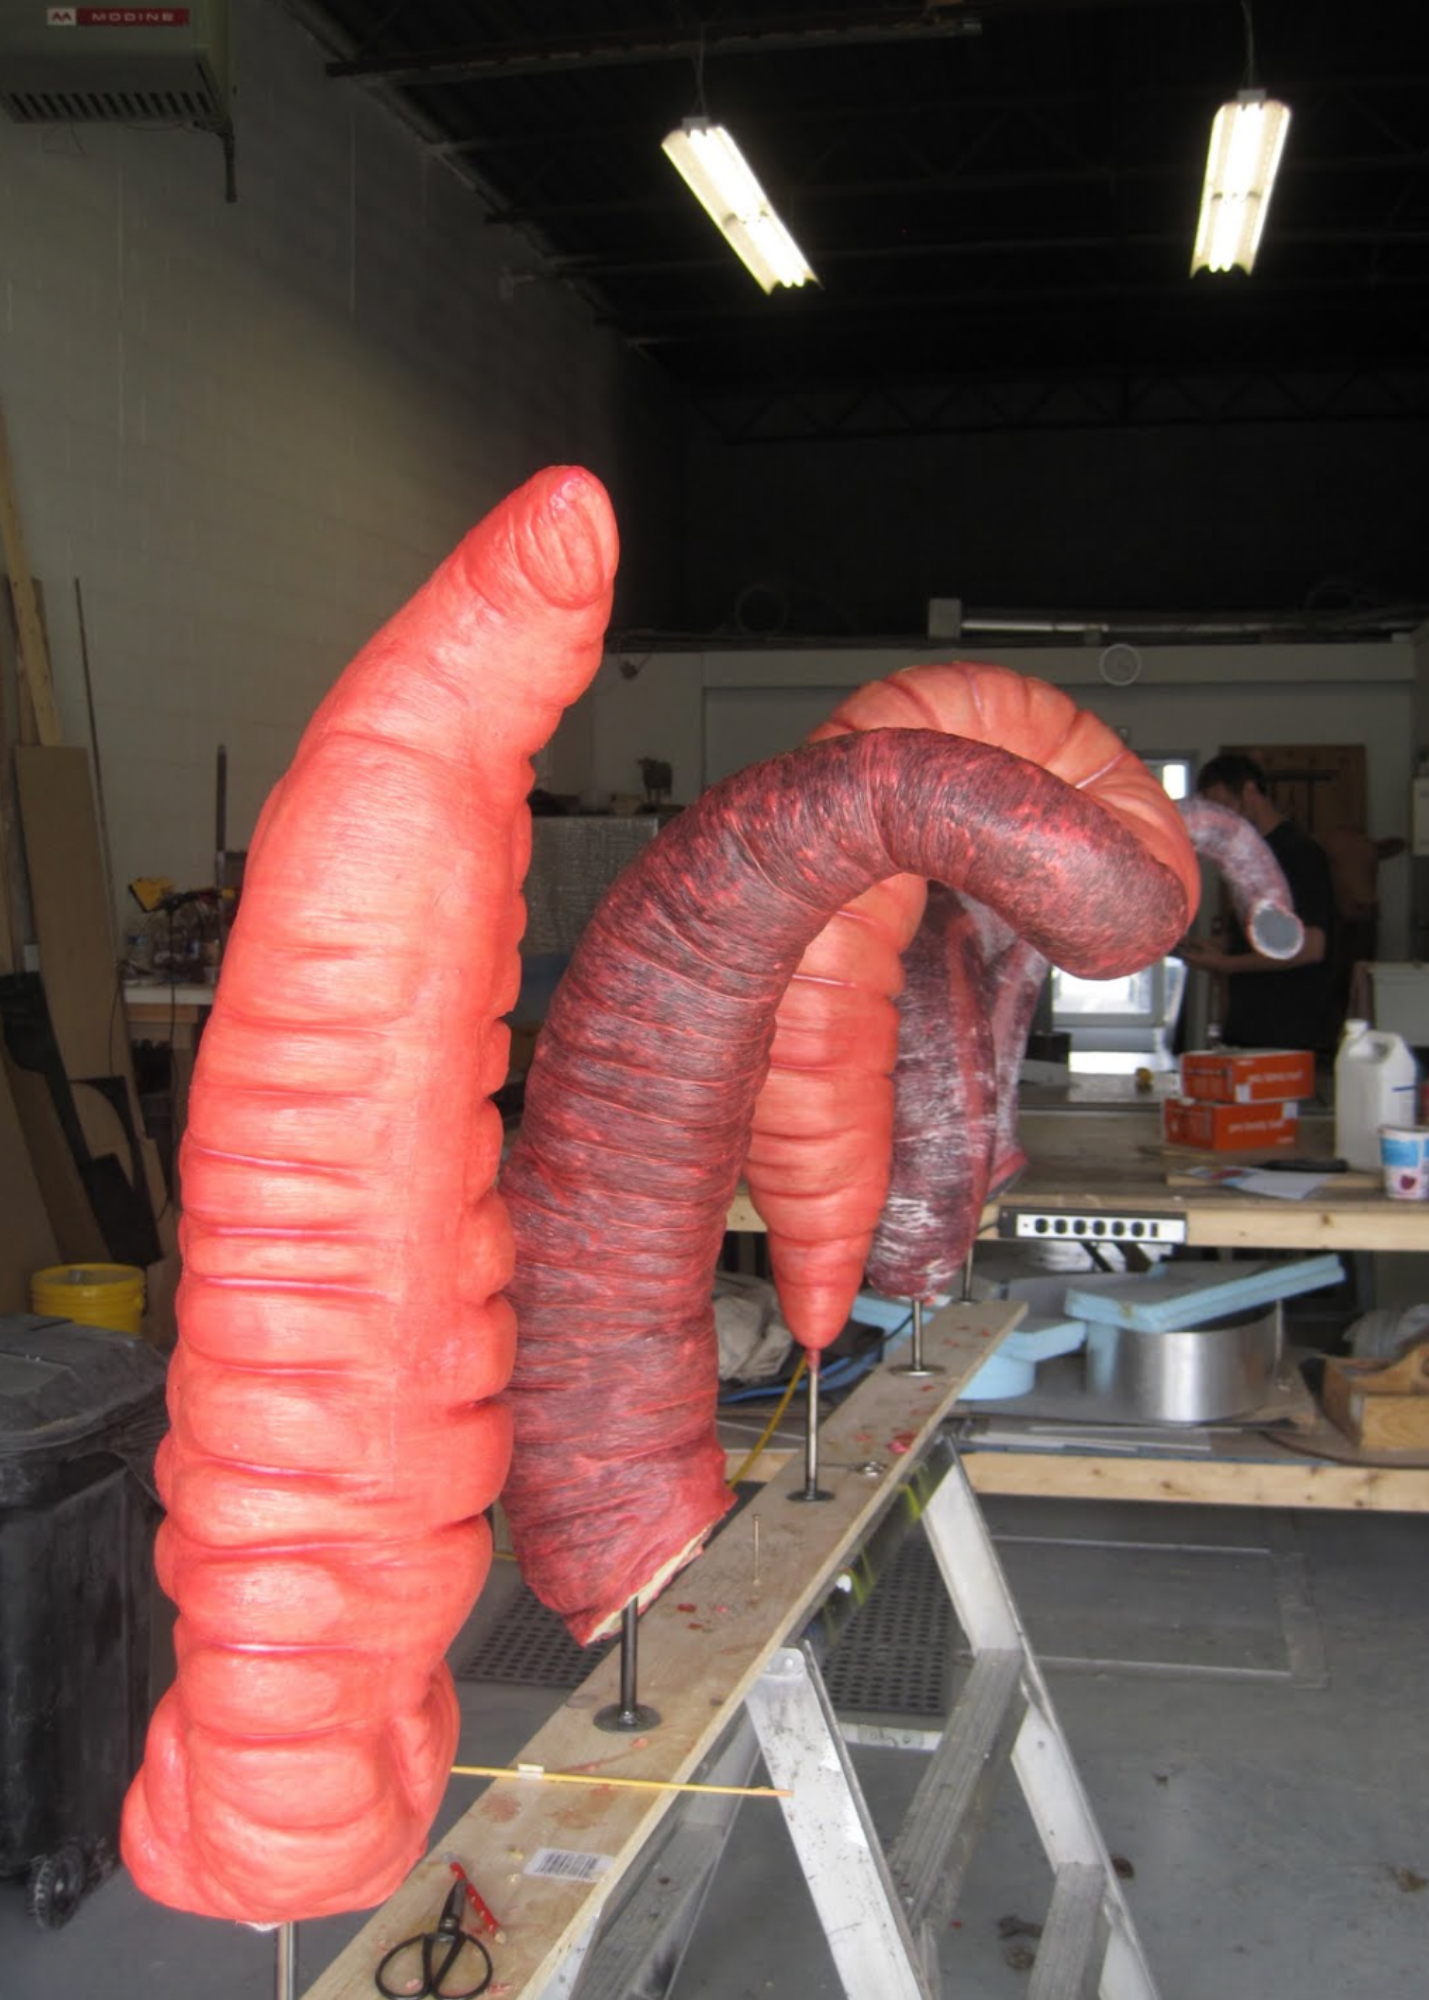  Work now continues on the equine colic simulator. Here the various sections of the equine large intestine are being prepared for assembly. Once assembled they will be fitted into the fiberglass equine model along with representations of the kidney’s